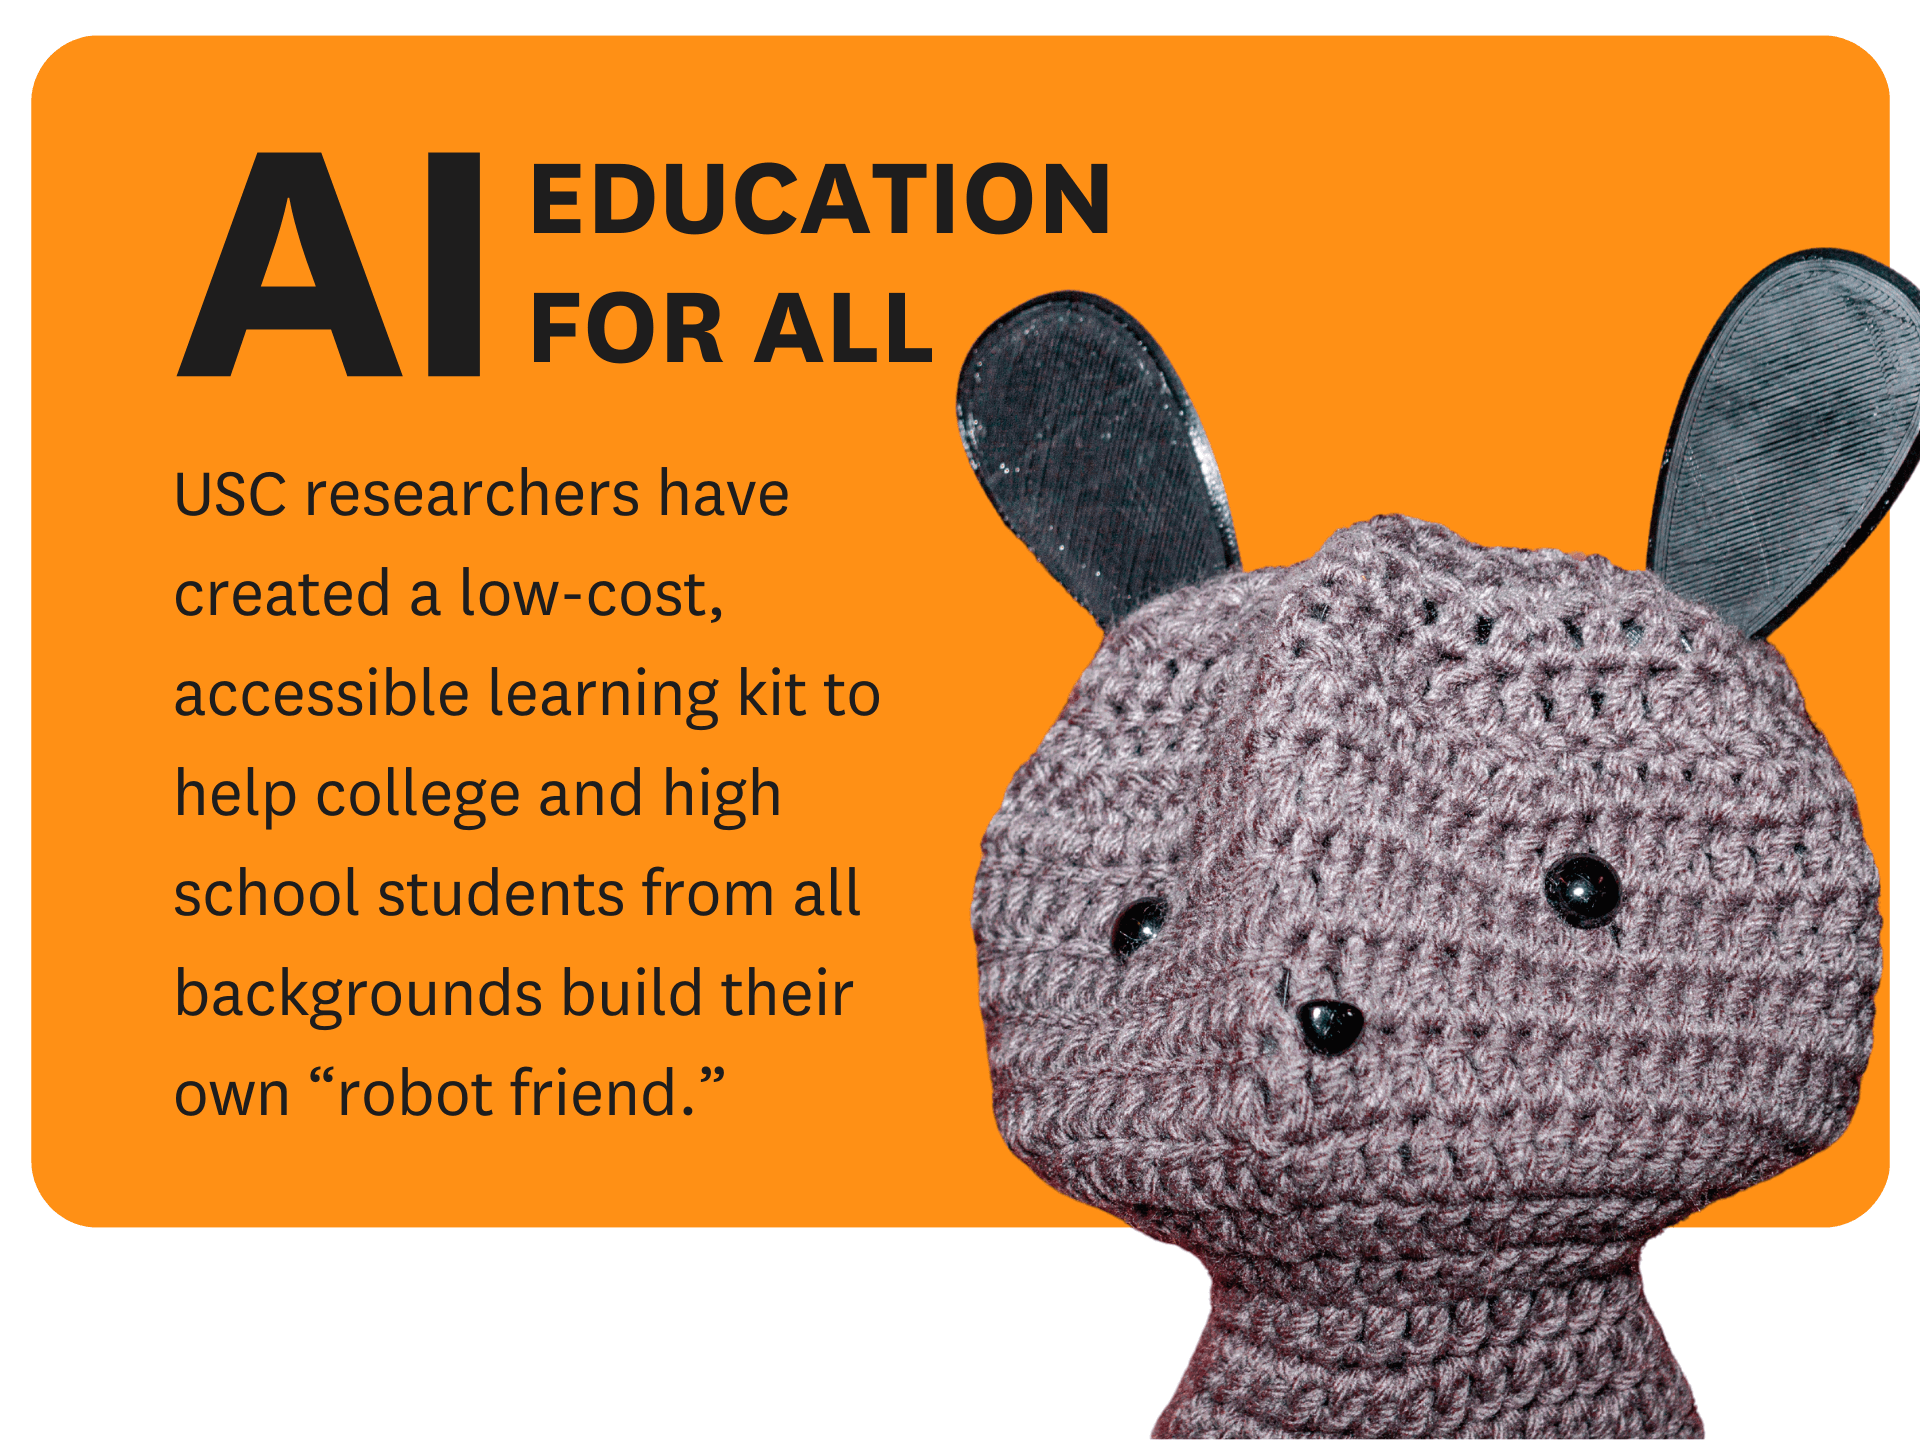 USC researchers have created a low-cost, accessible learning kit to help college and high school students from all backgrounds build their own “robot friend.”